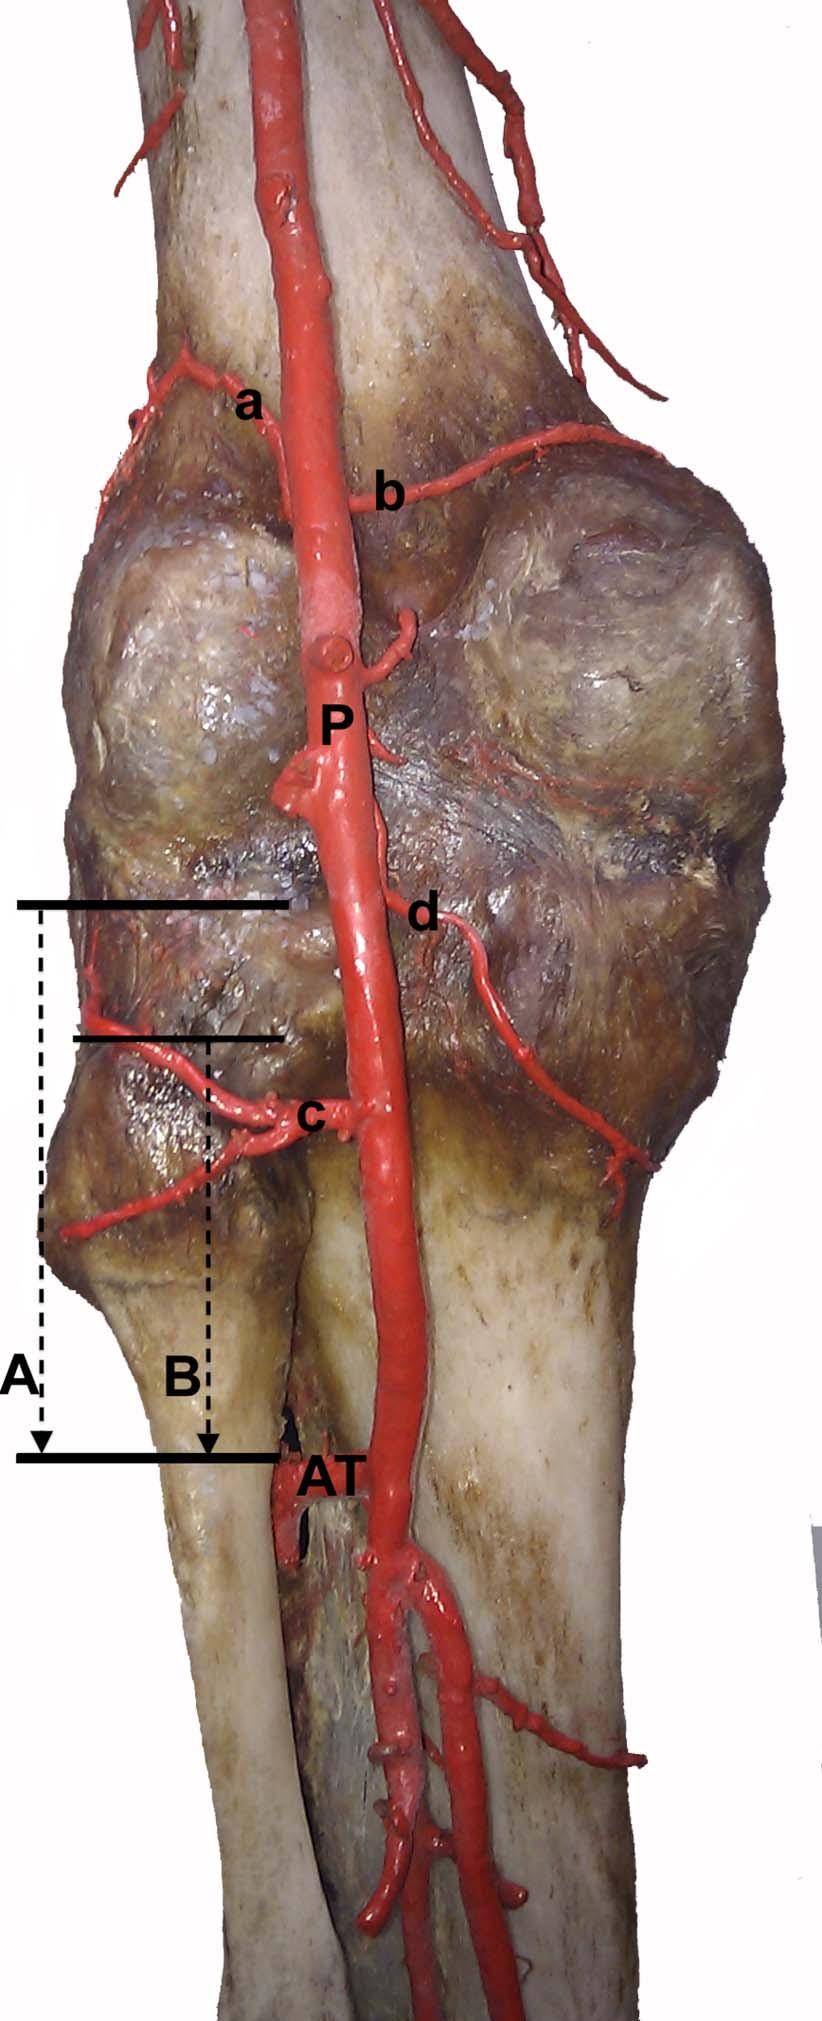 J Orthop Trauma Volume 27, Number 4, April 2013 Risk of Injury to the Anterior Tibial Artery FIGURE 8.